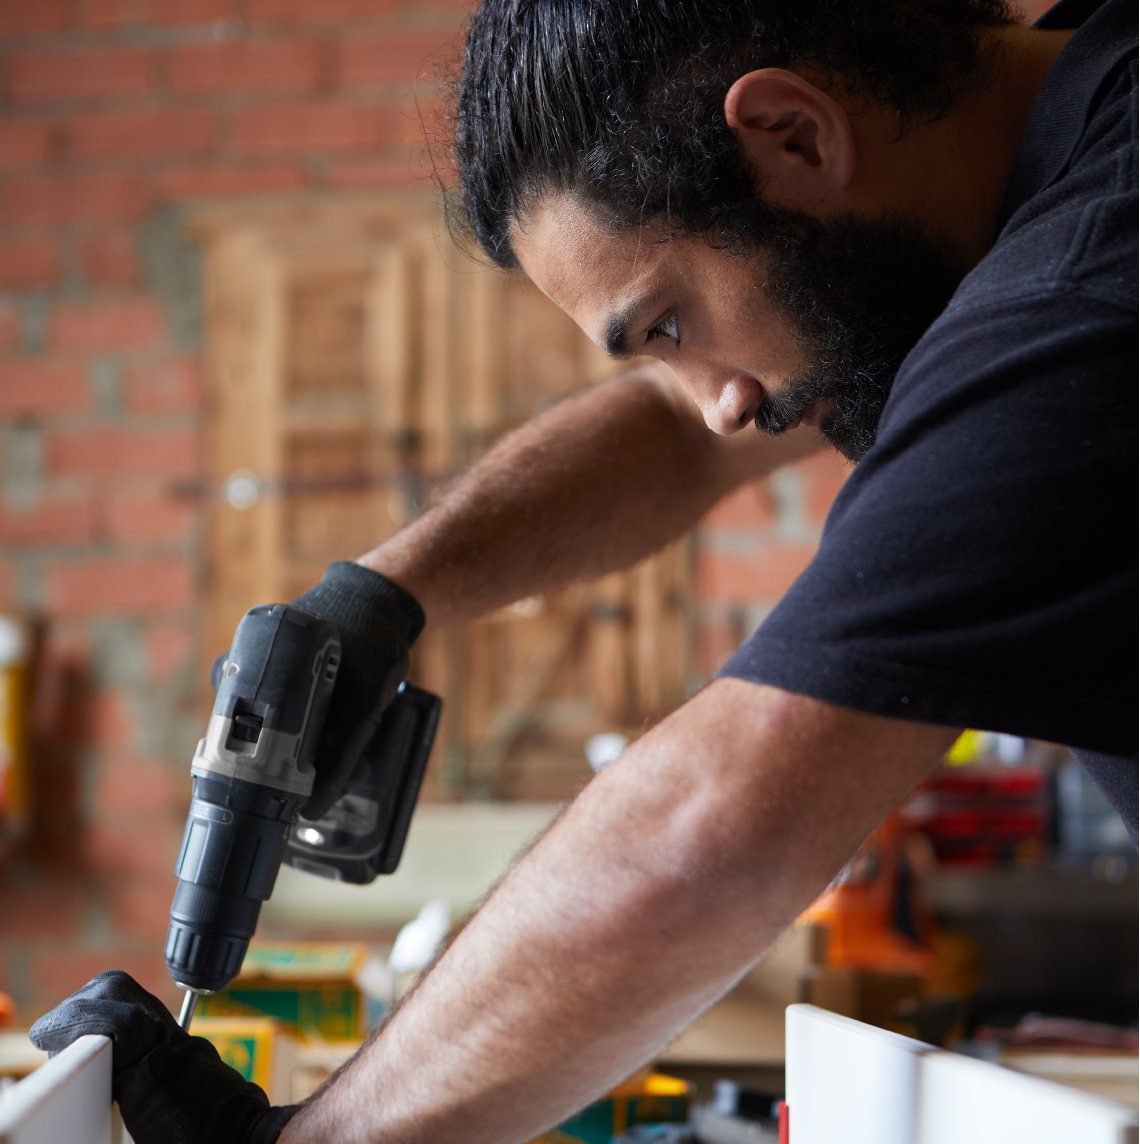 Latinx man using power drill in his workshop.